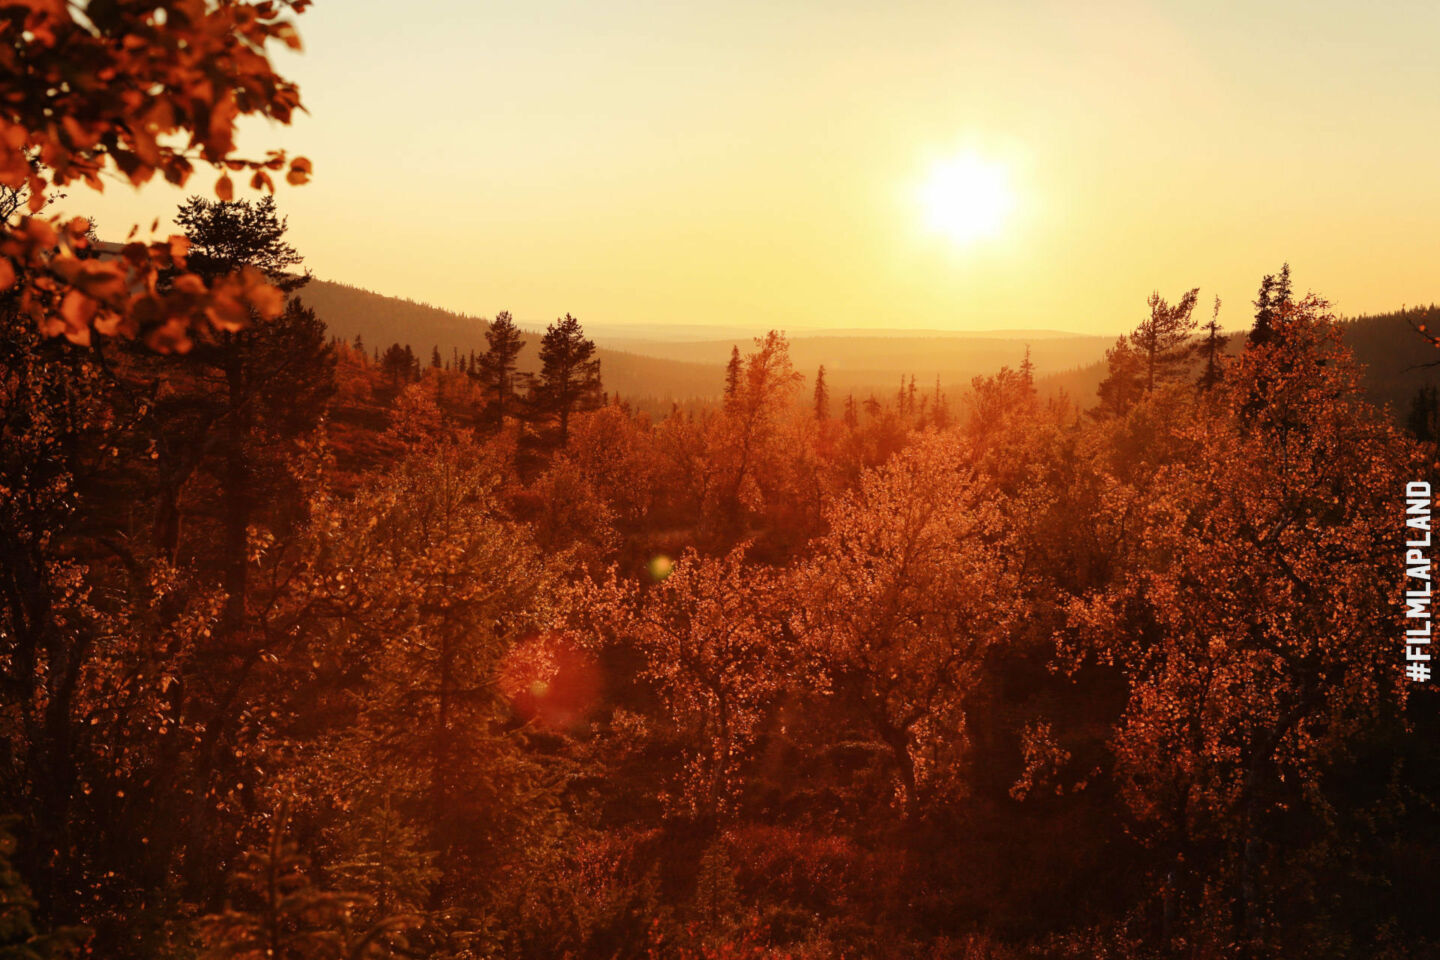 Sunsets & autumn colors in Muonio, a feature of filming in Finnish Lapland locations